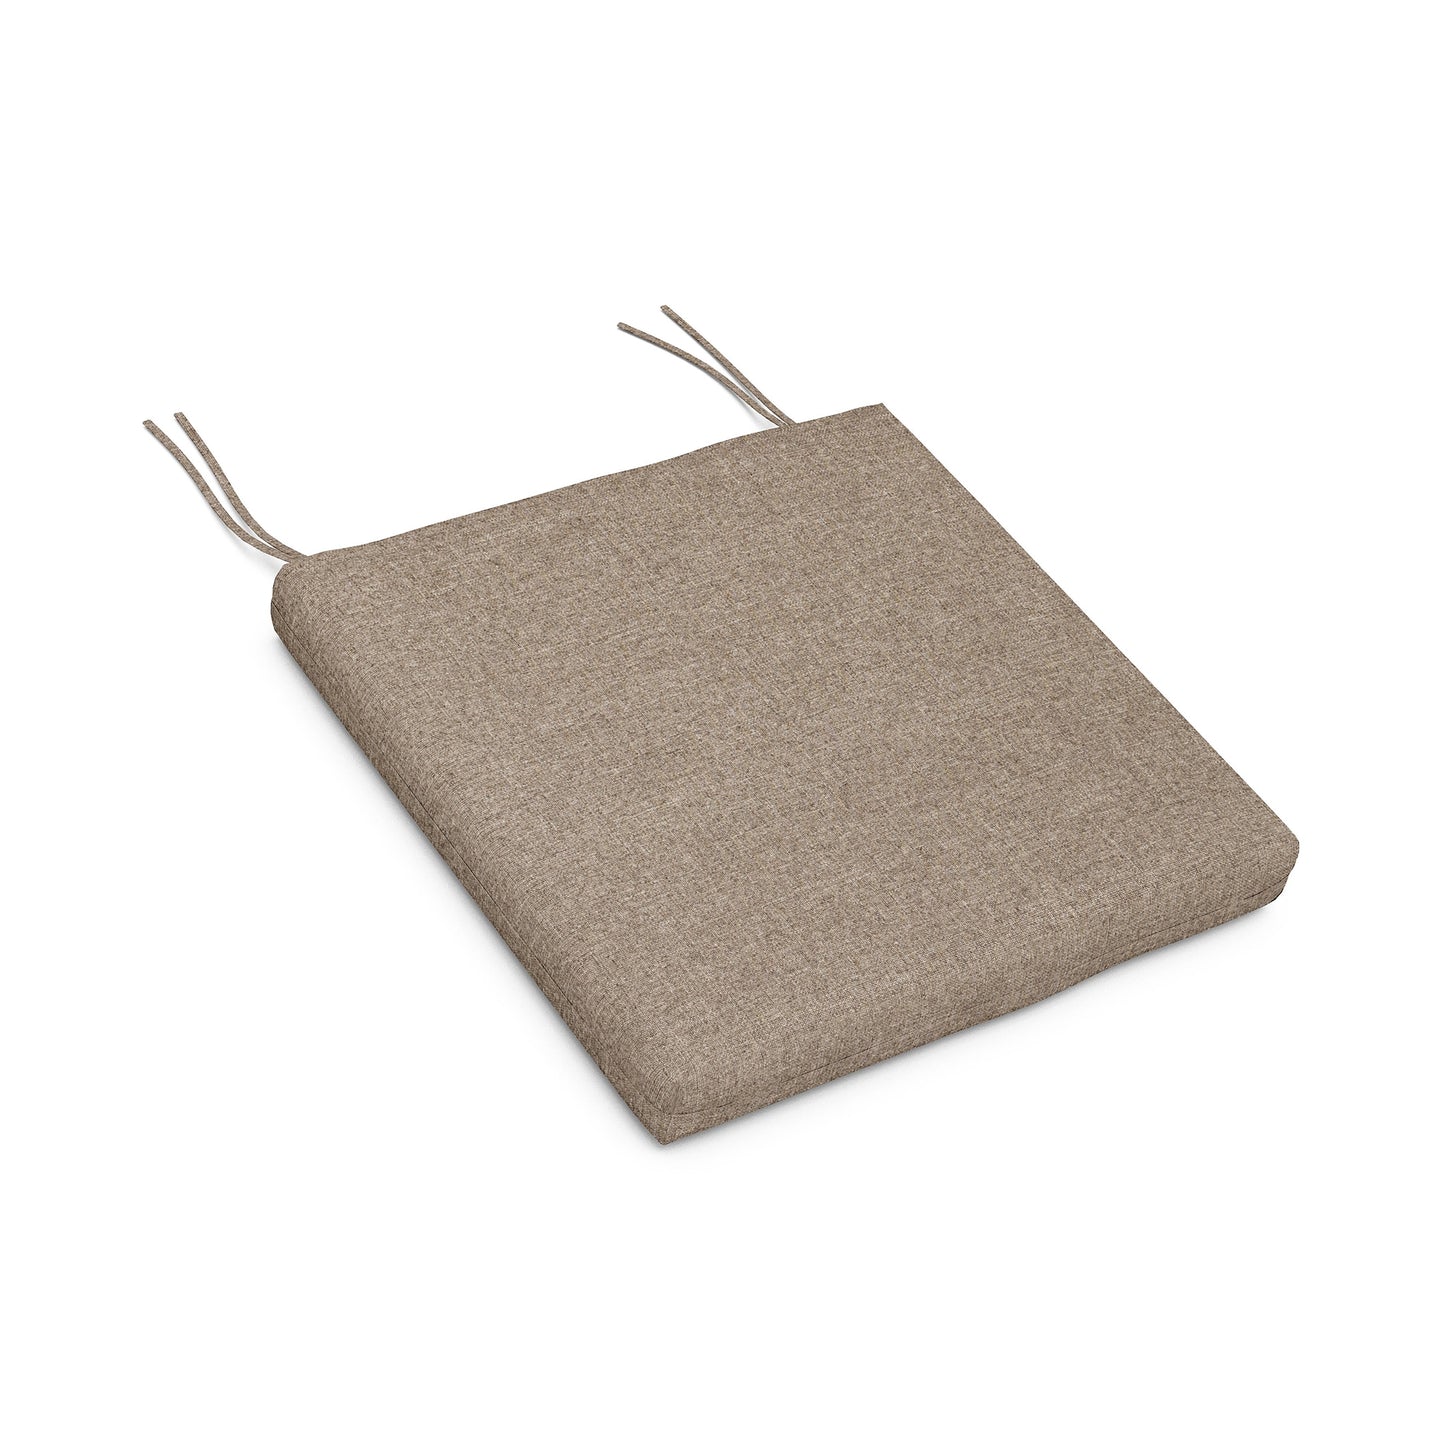 A beige ceramic capacitor isolated on a white background with POLYWOOD weather-resistant upholstery fabric.